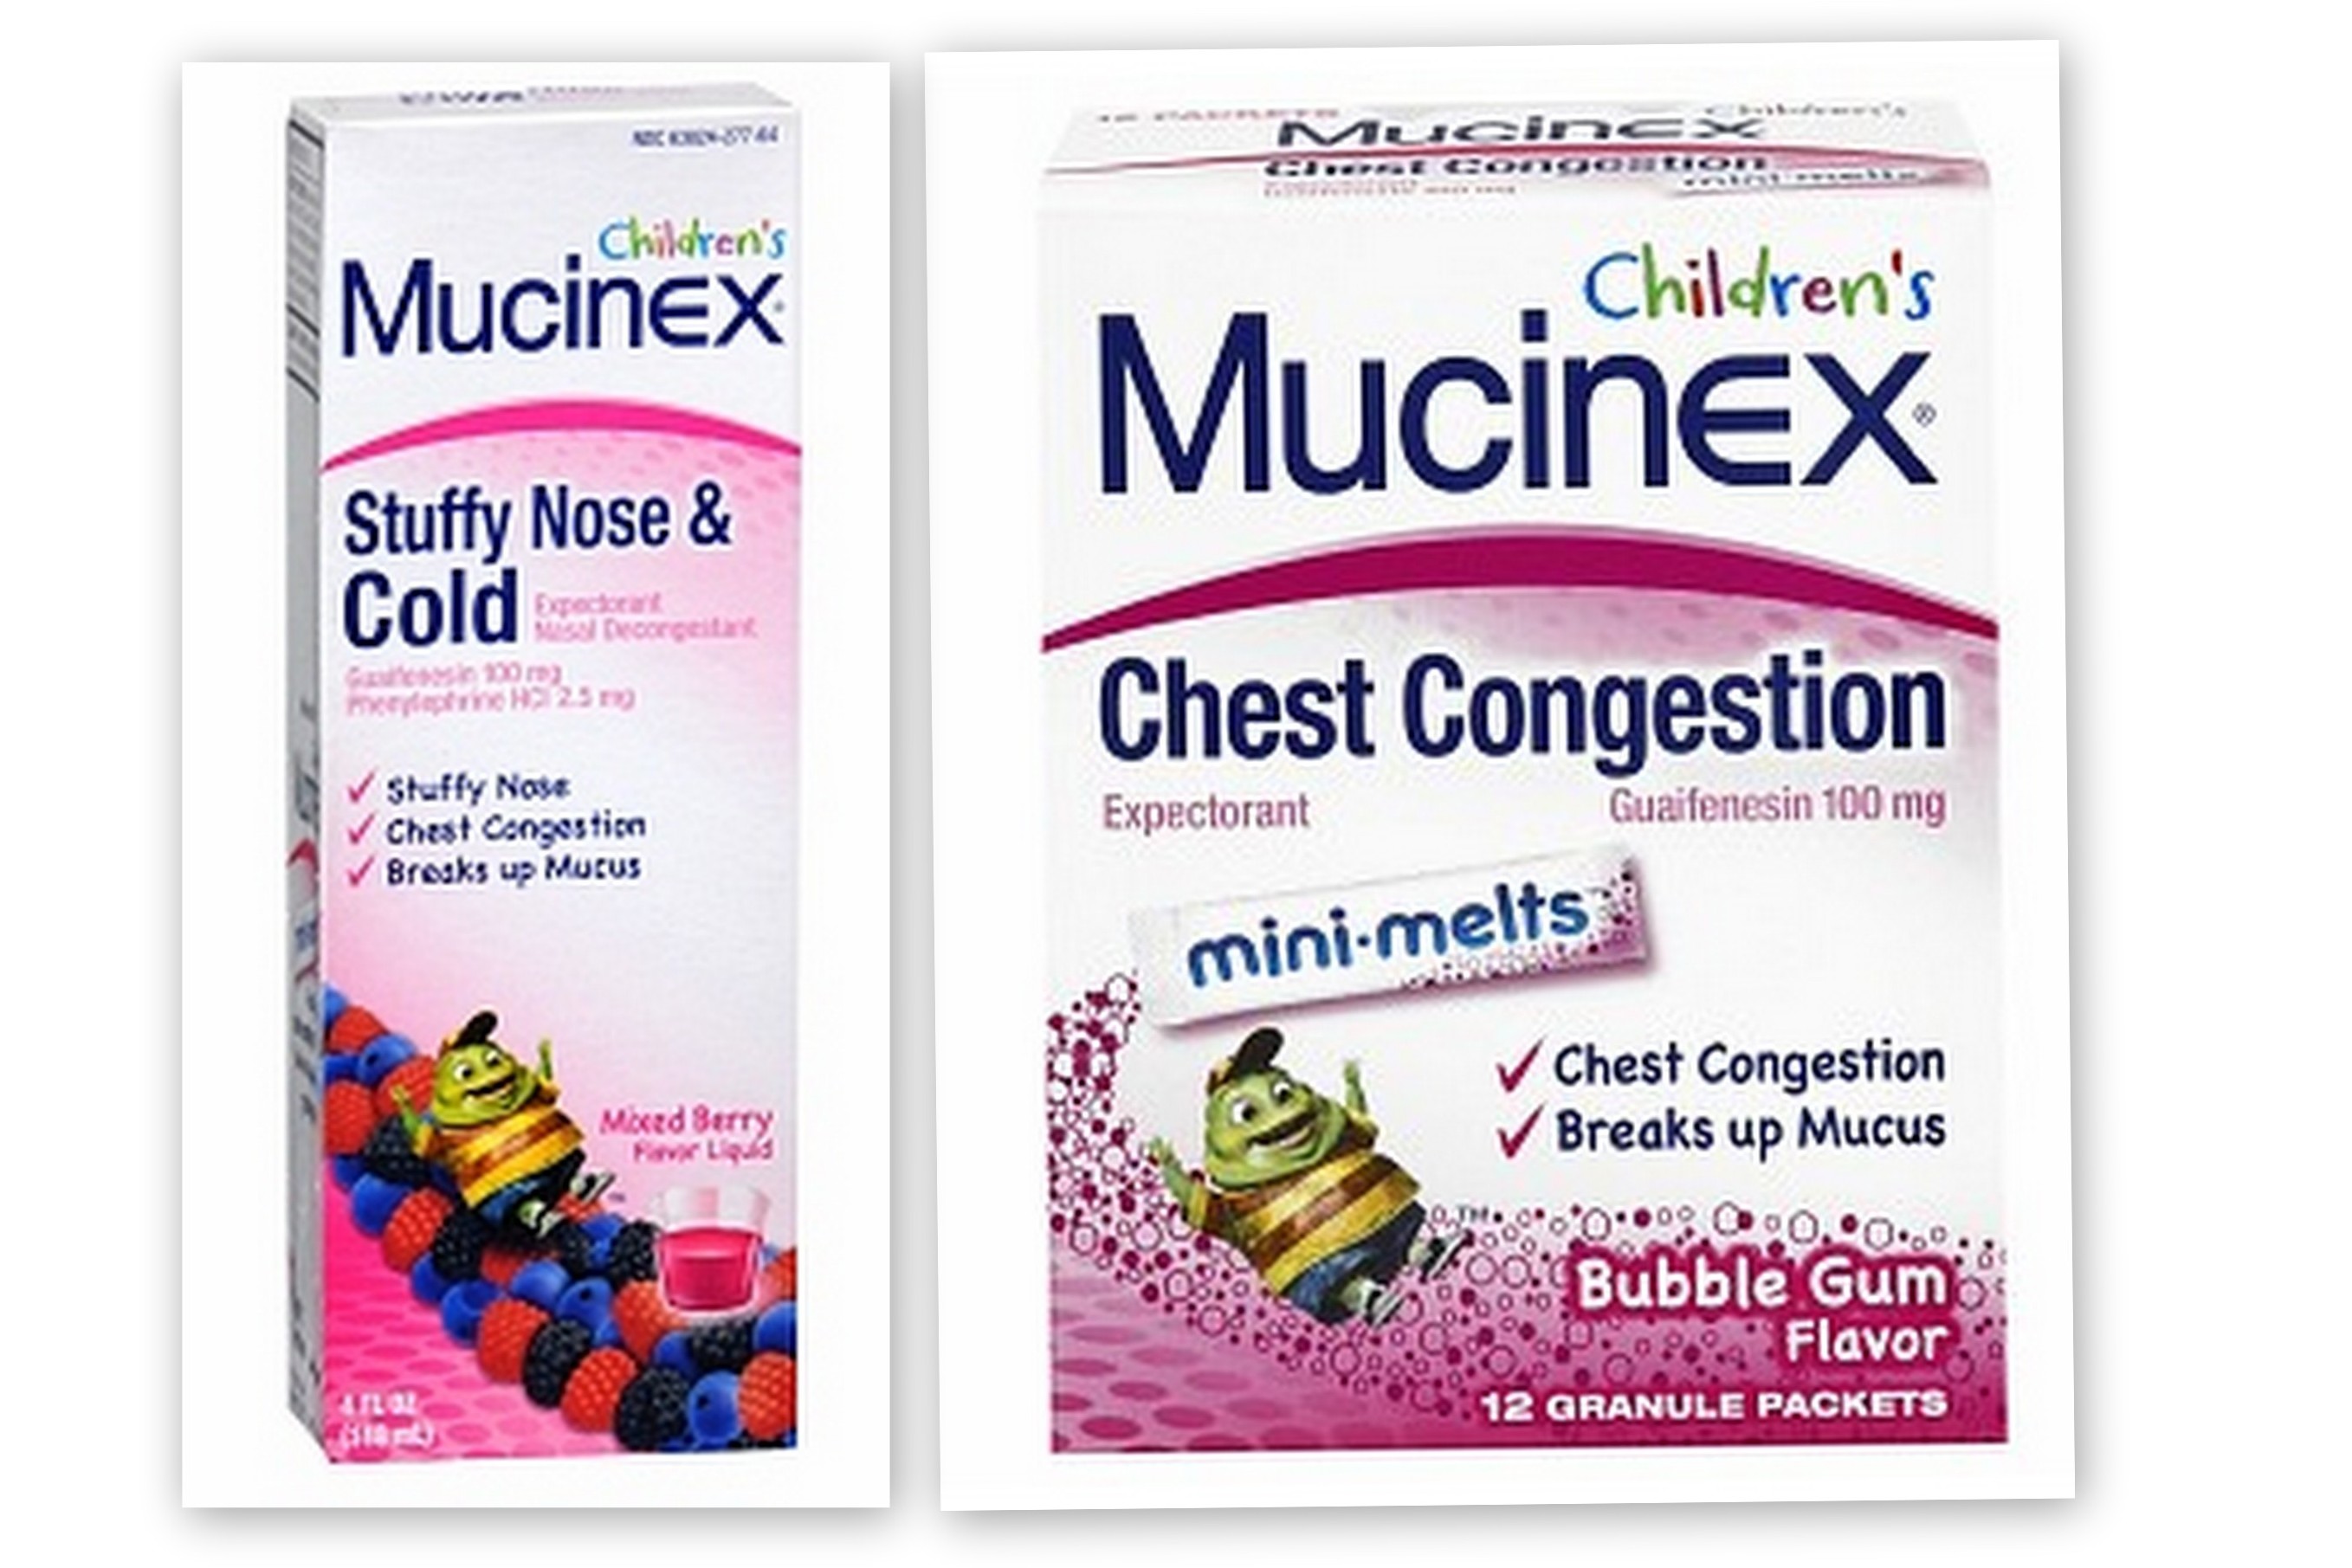 Printable Coupons: Dove Chocolate, Mucinex, Afrin, Skintimate Shave Gel and More